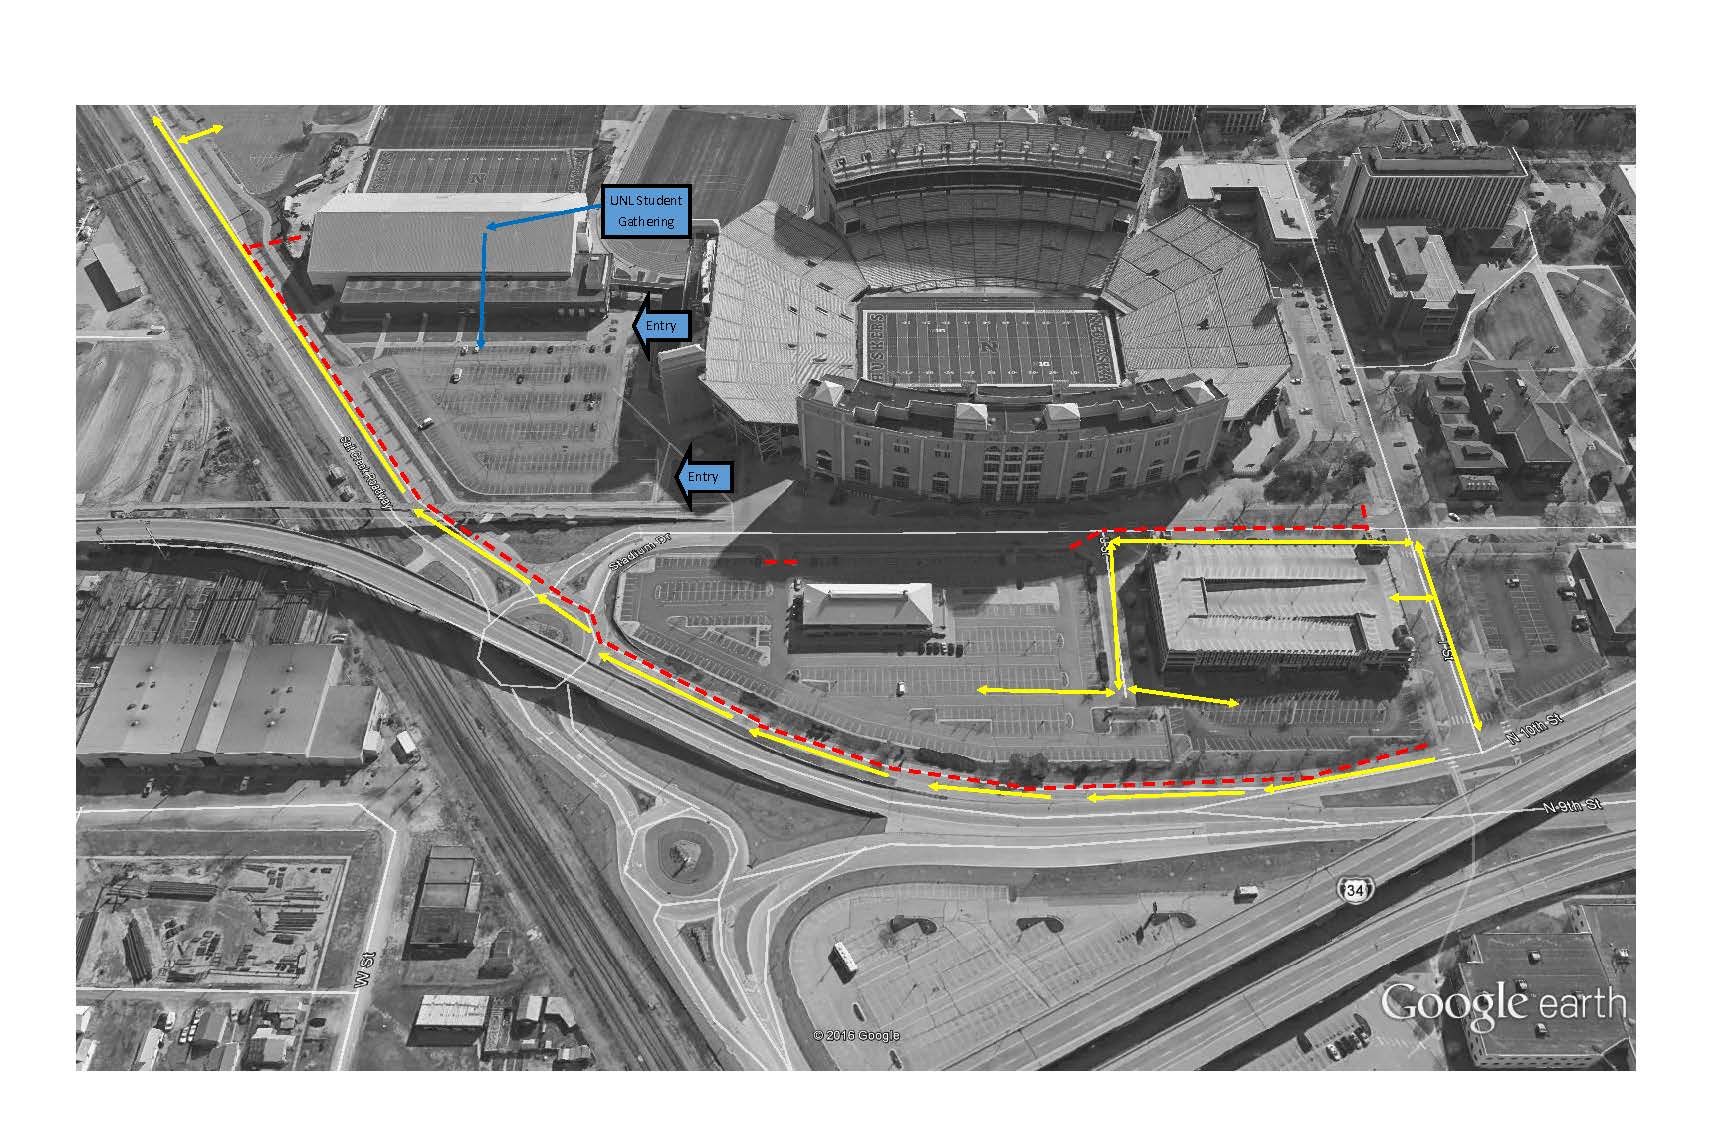 This map provides details of the concert parking plan.